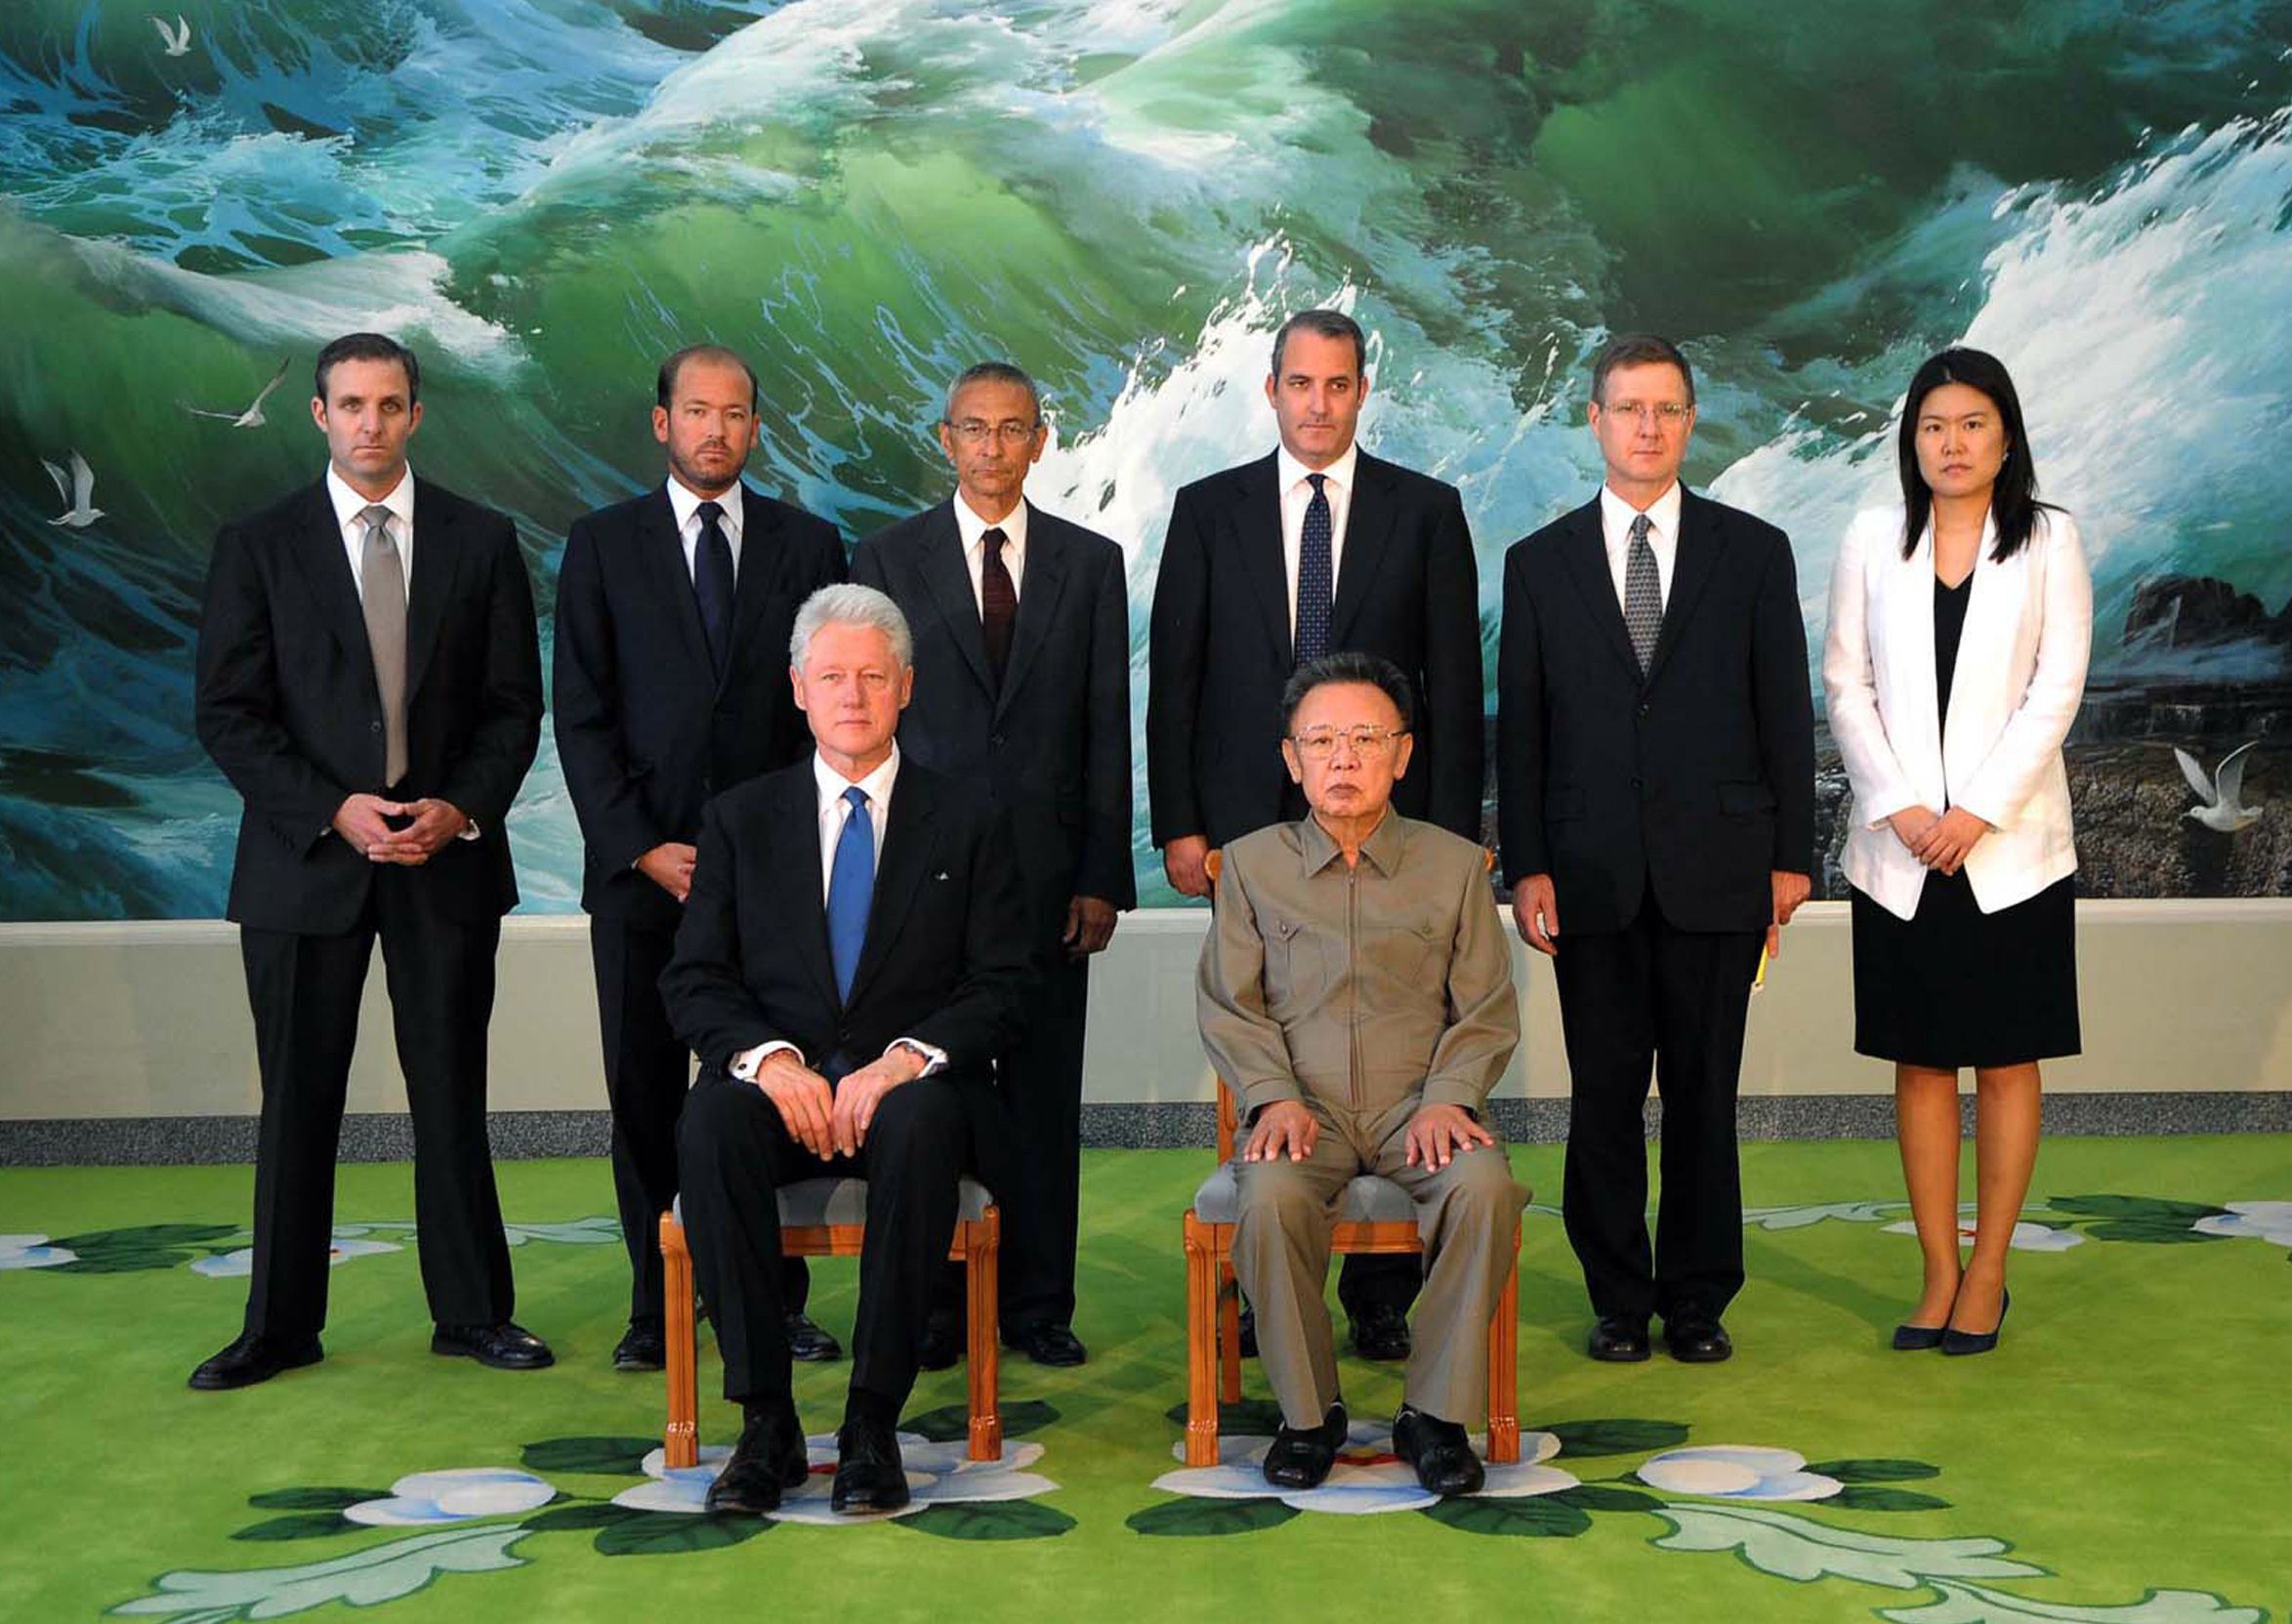 North Korean leader Kim Jong Il poses with former U.S. President Bill Clinton and members of his delegation in Pyongyang on Aug. 4, 2009. | AFP-JIJI